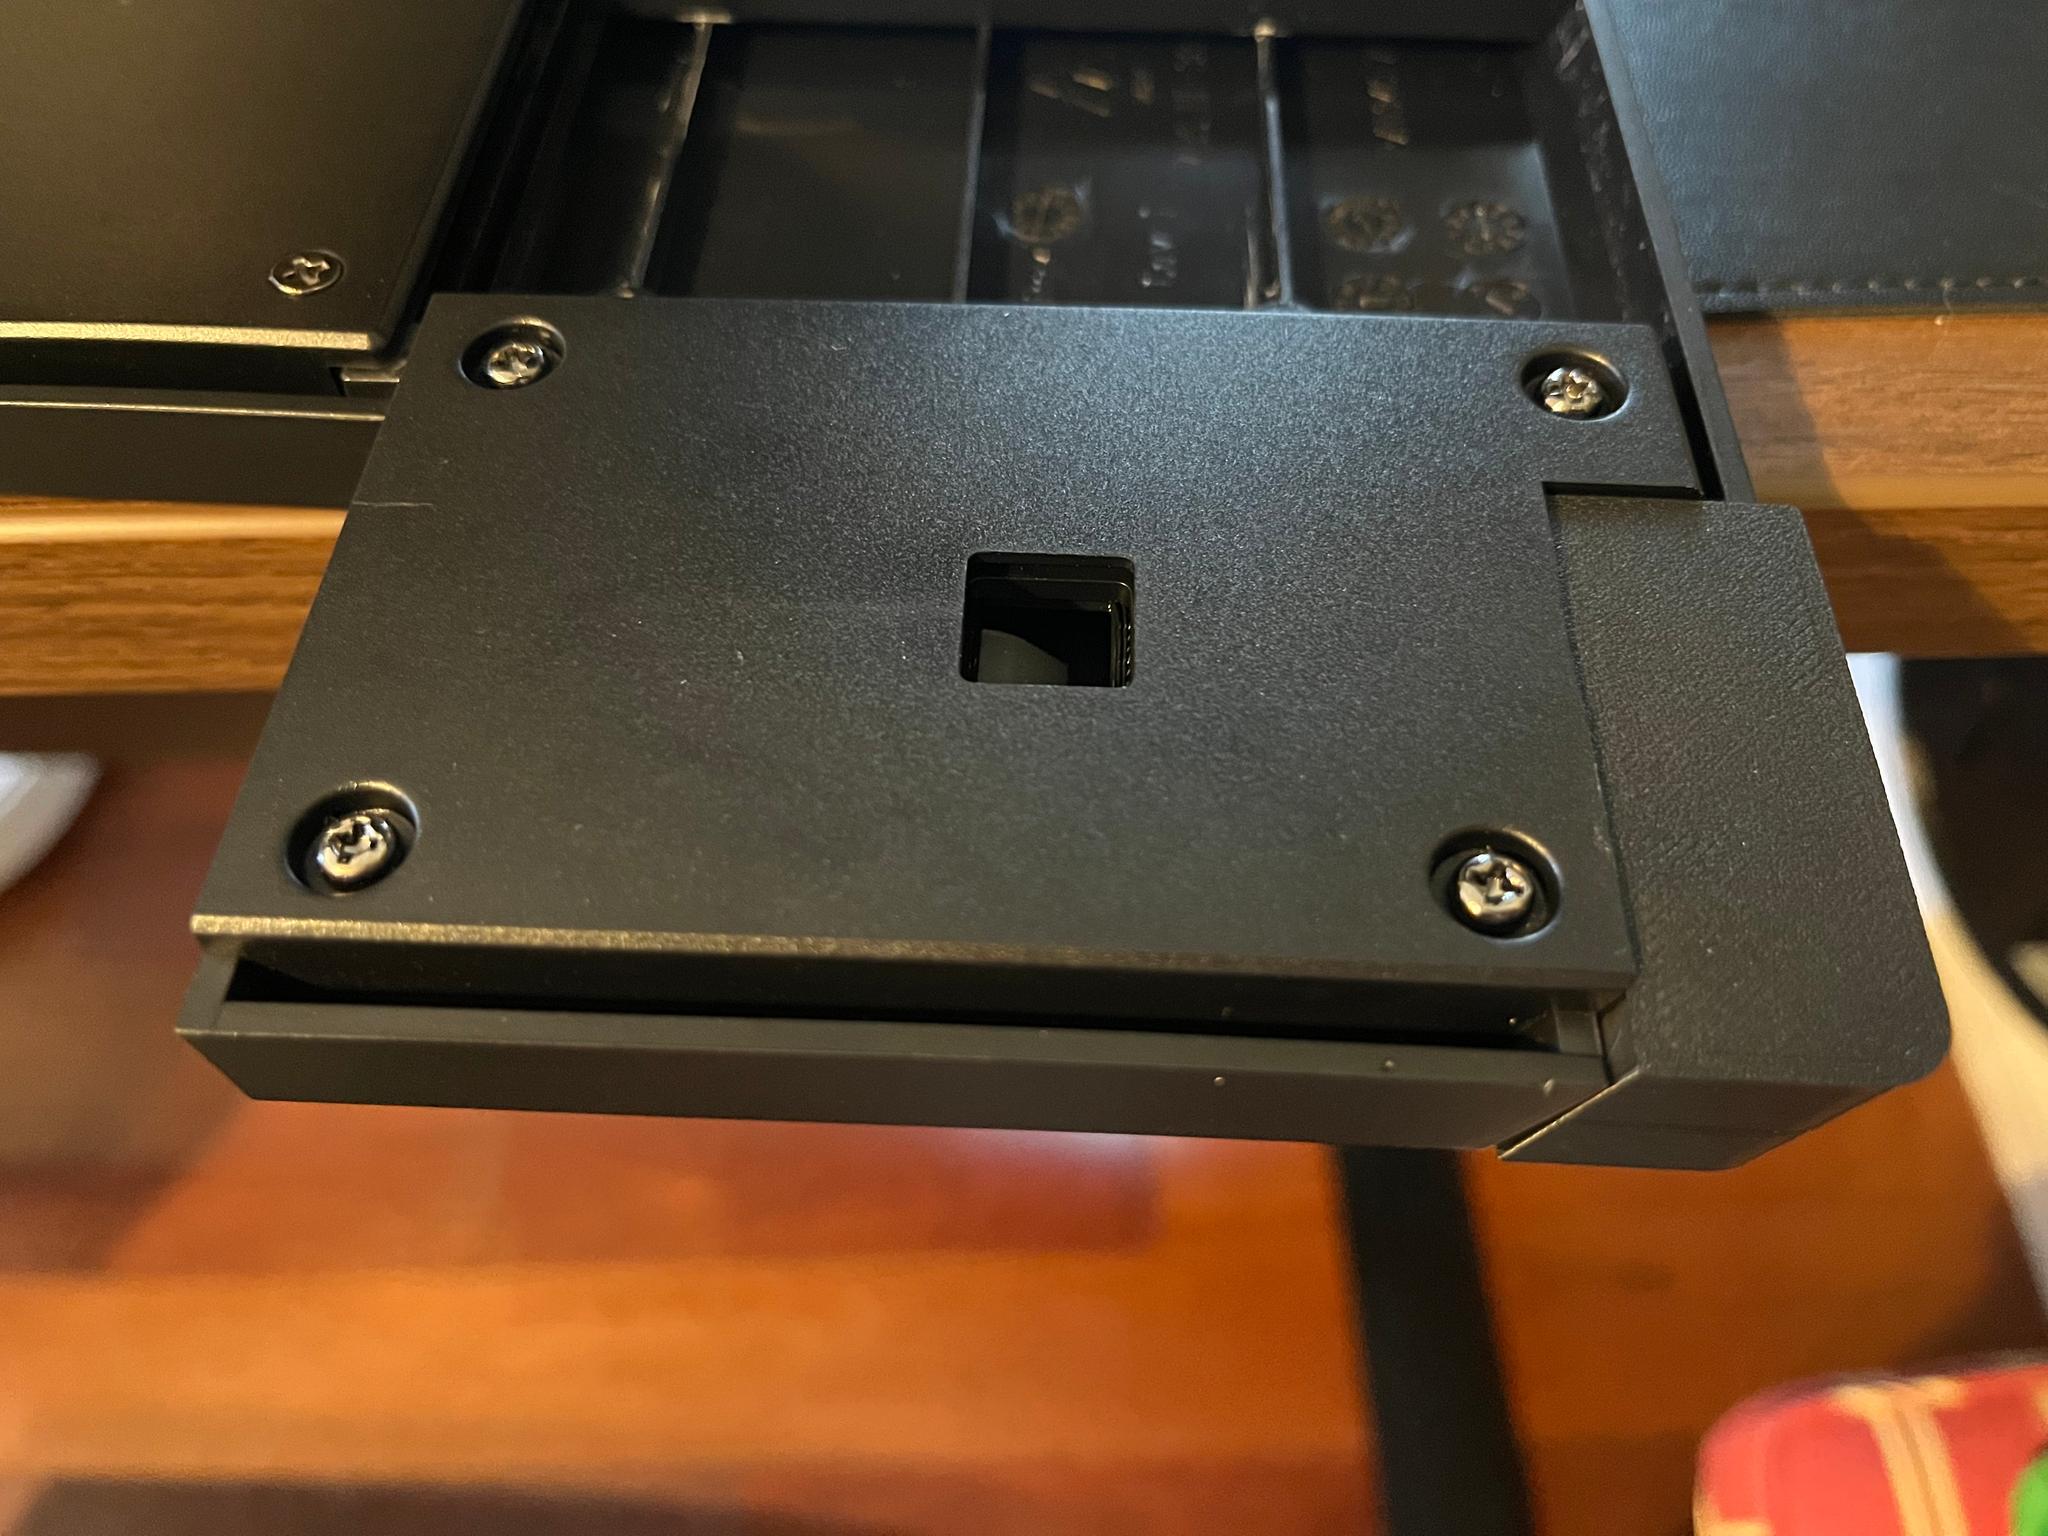 Insert in laptop stand but not locked in due to end cap angle.